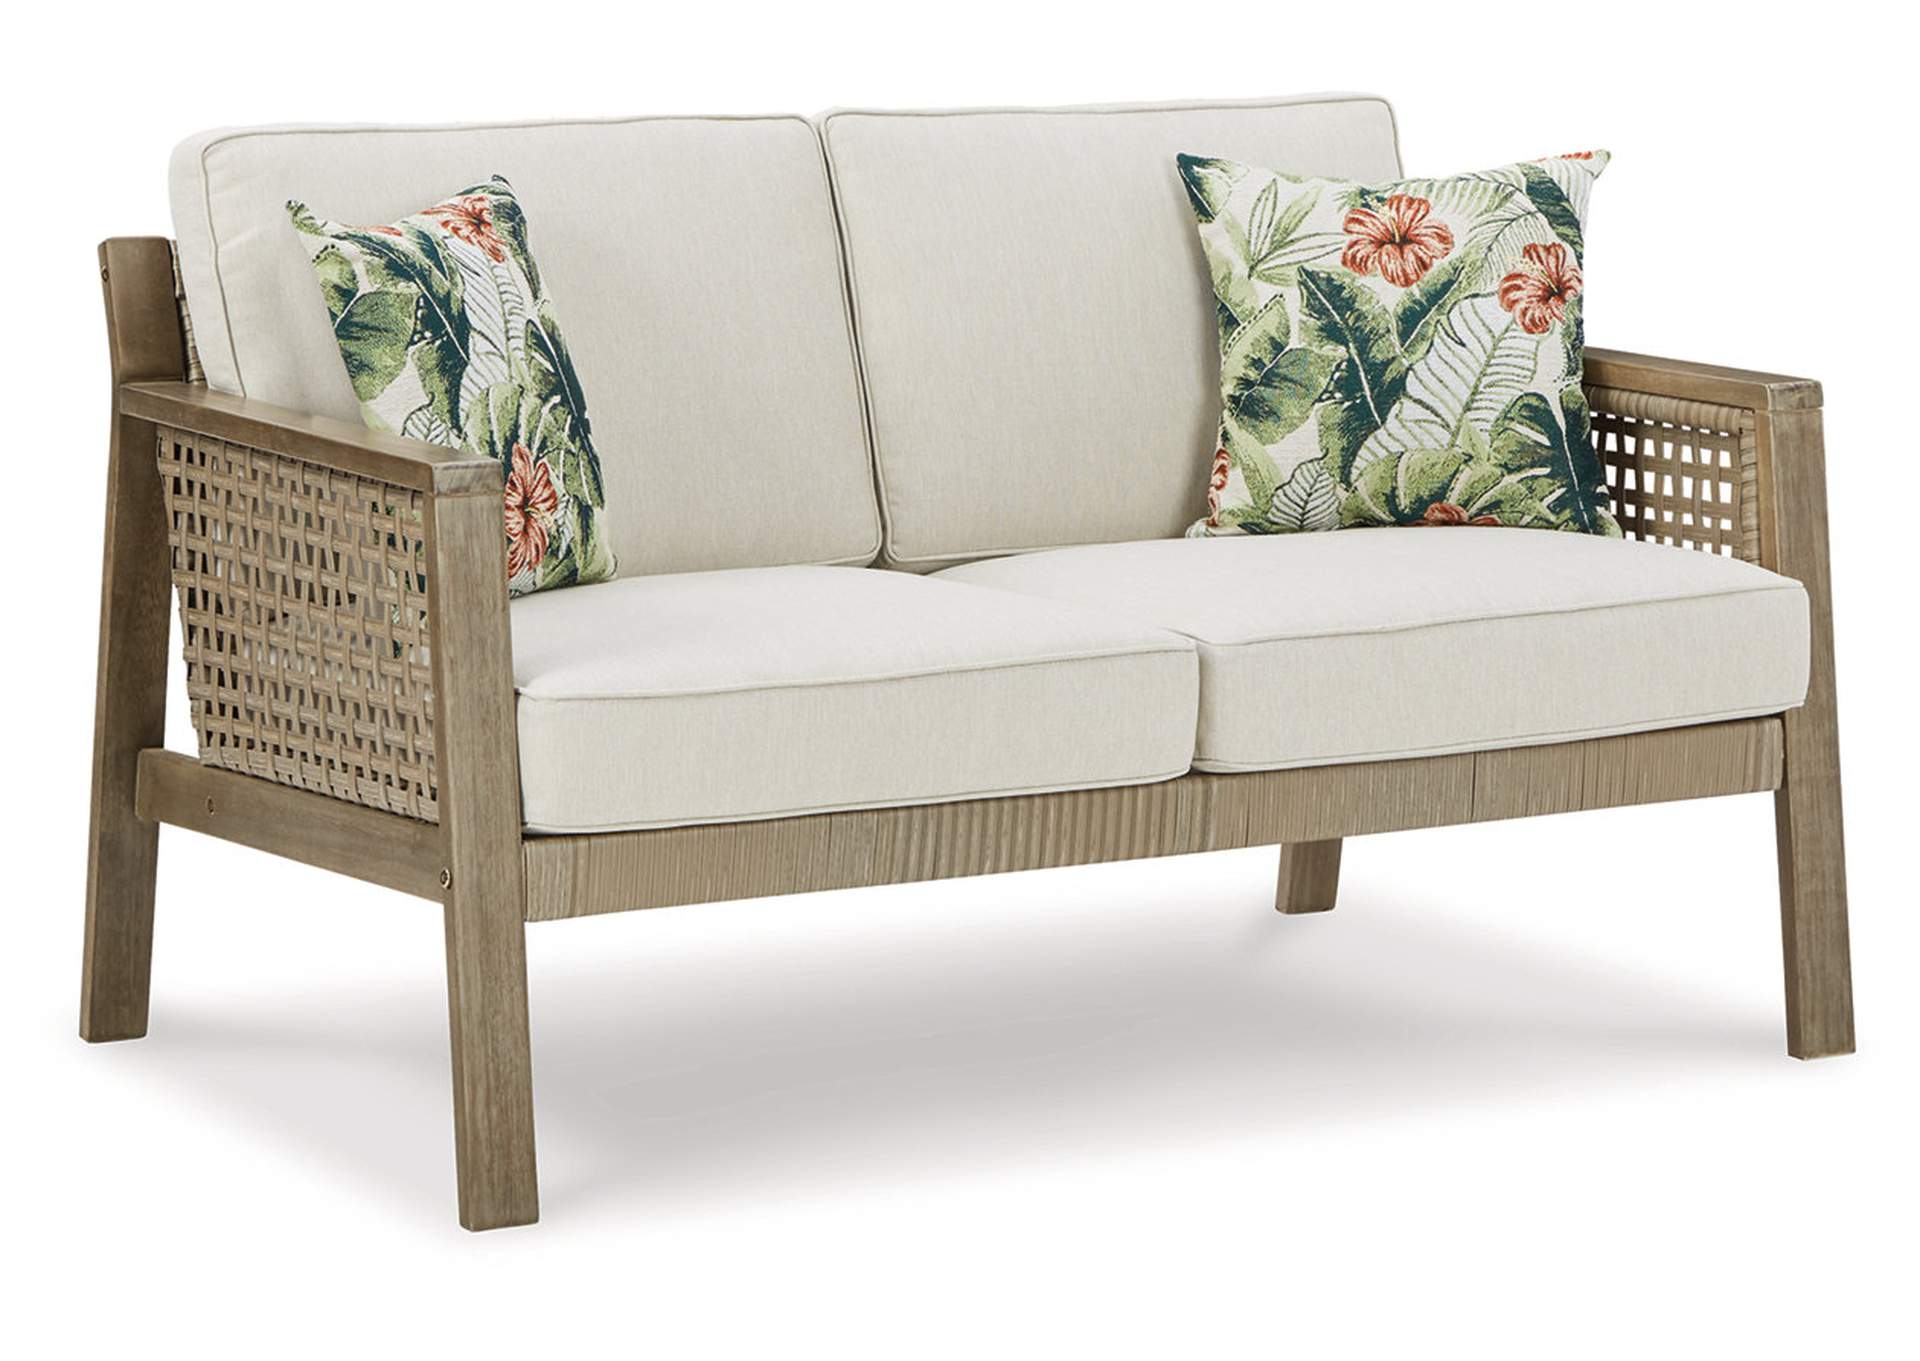 Barn Cove Loveseat with Cushion,Outdoor By Ashley